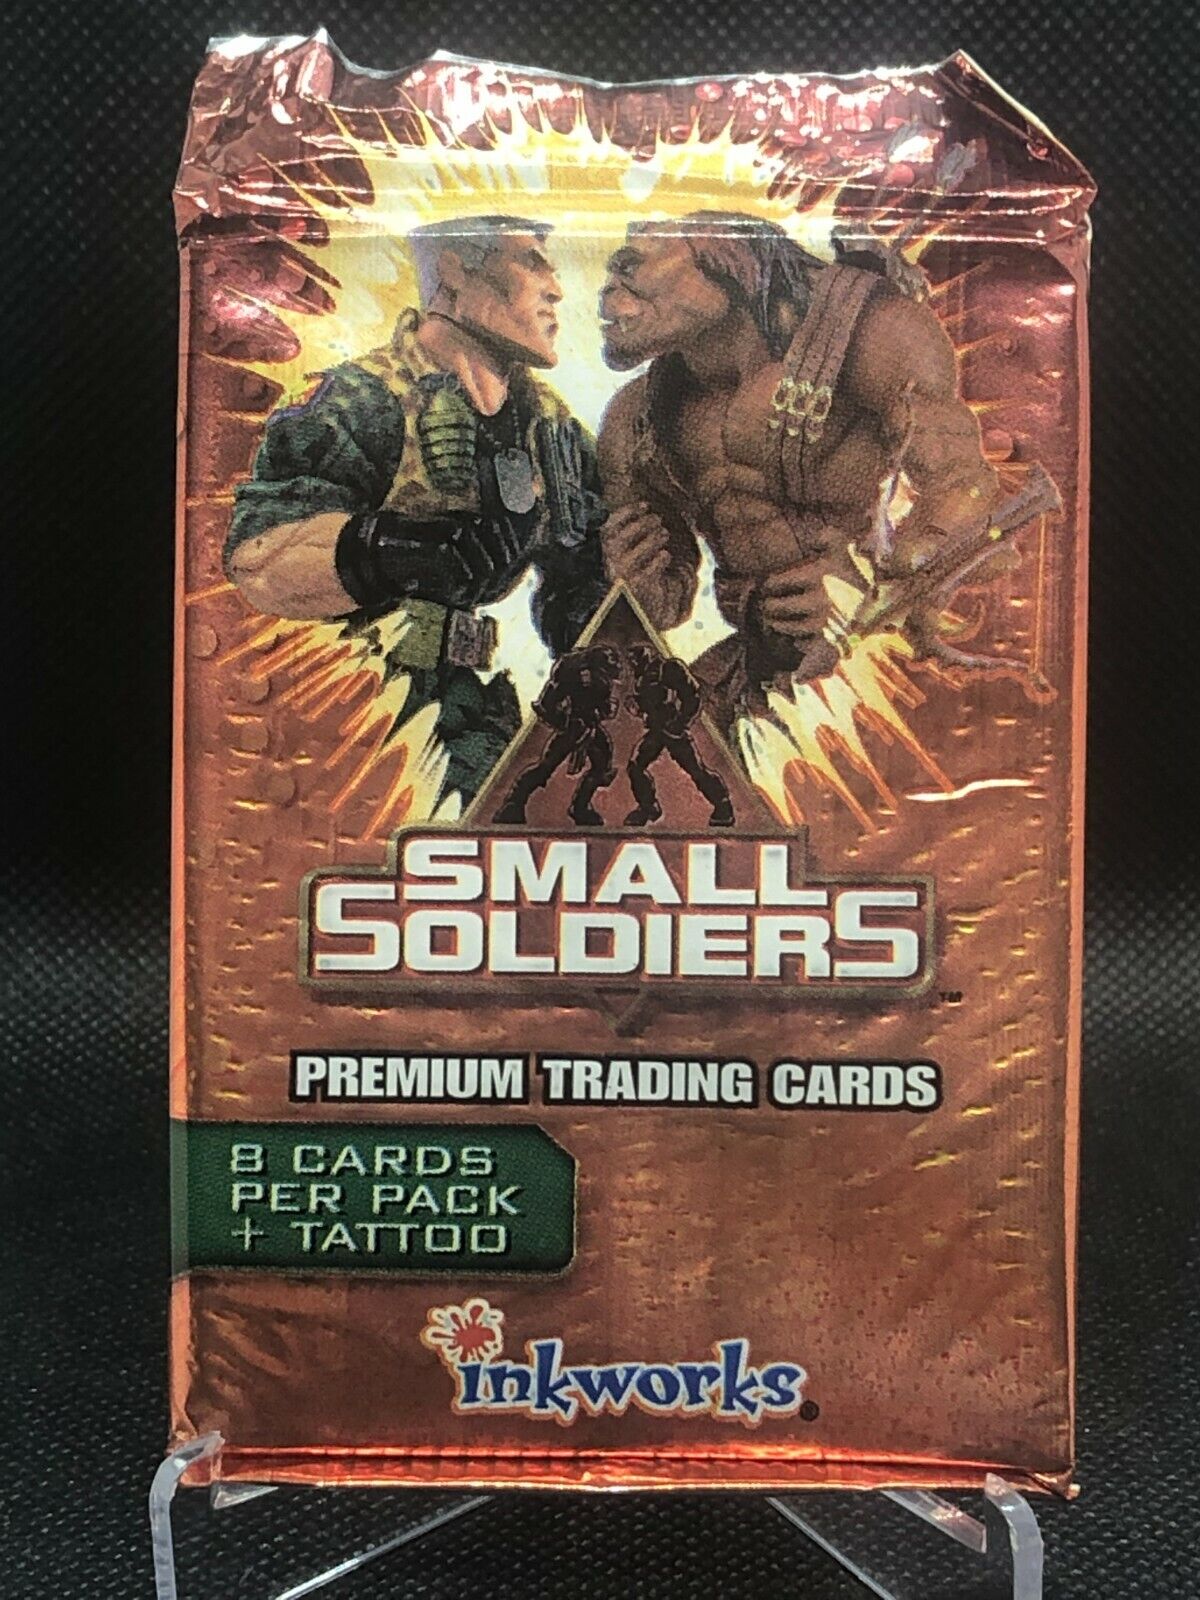  1998 Small Soldiers Inkworks Movie Trading Cards -1 NEW SEALED UNOPENED PACK